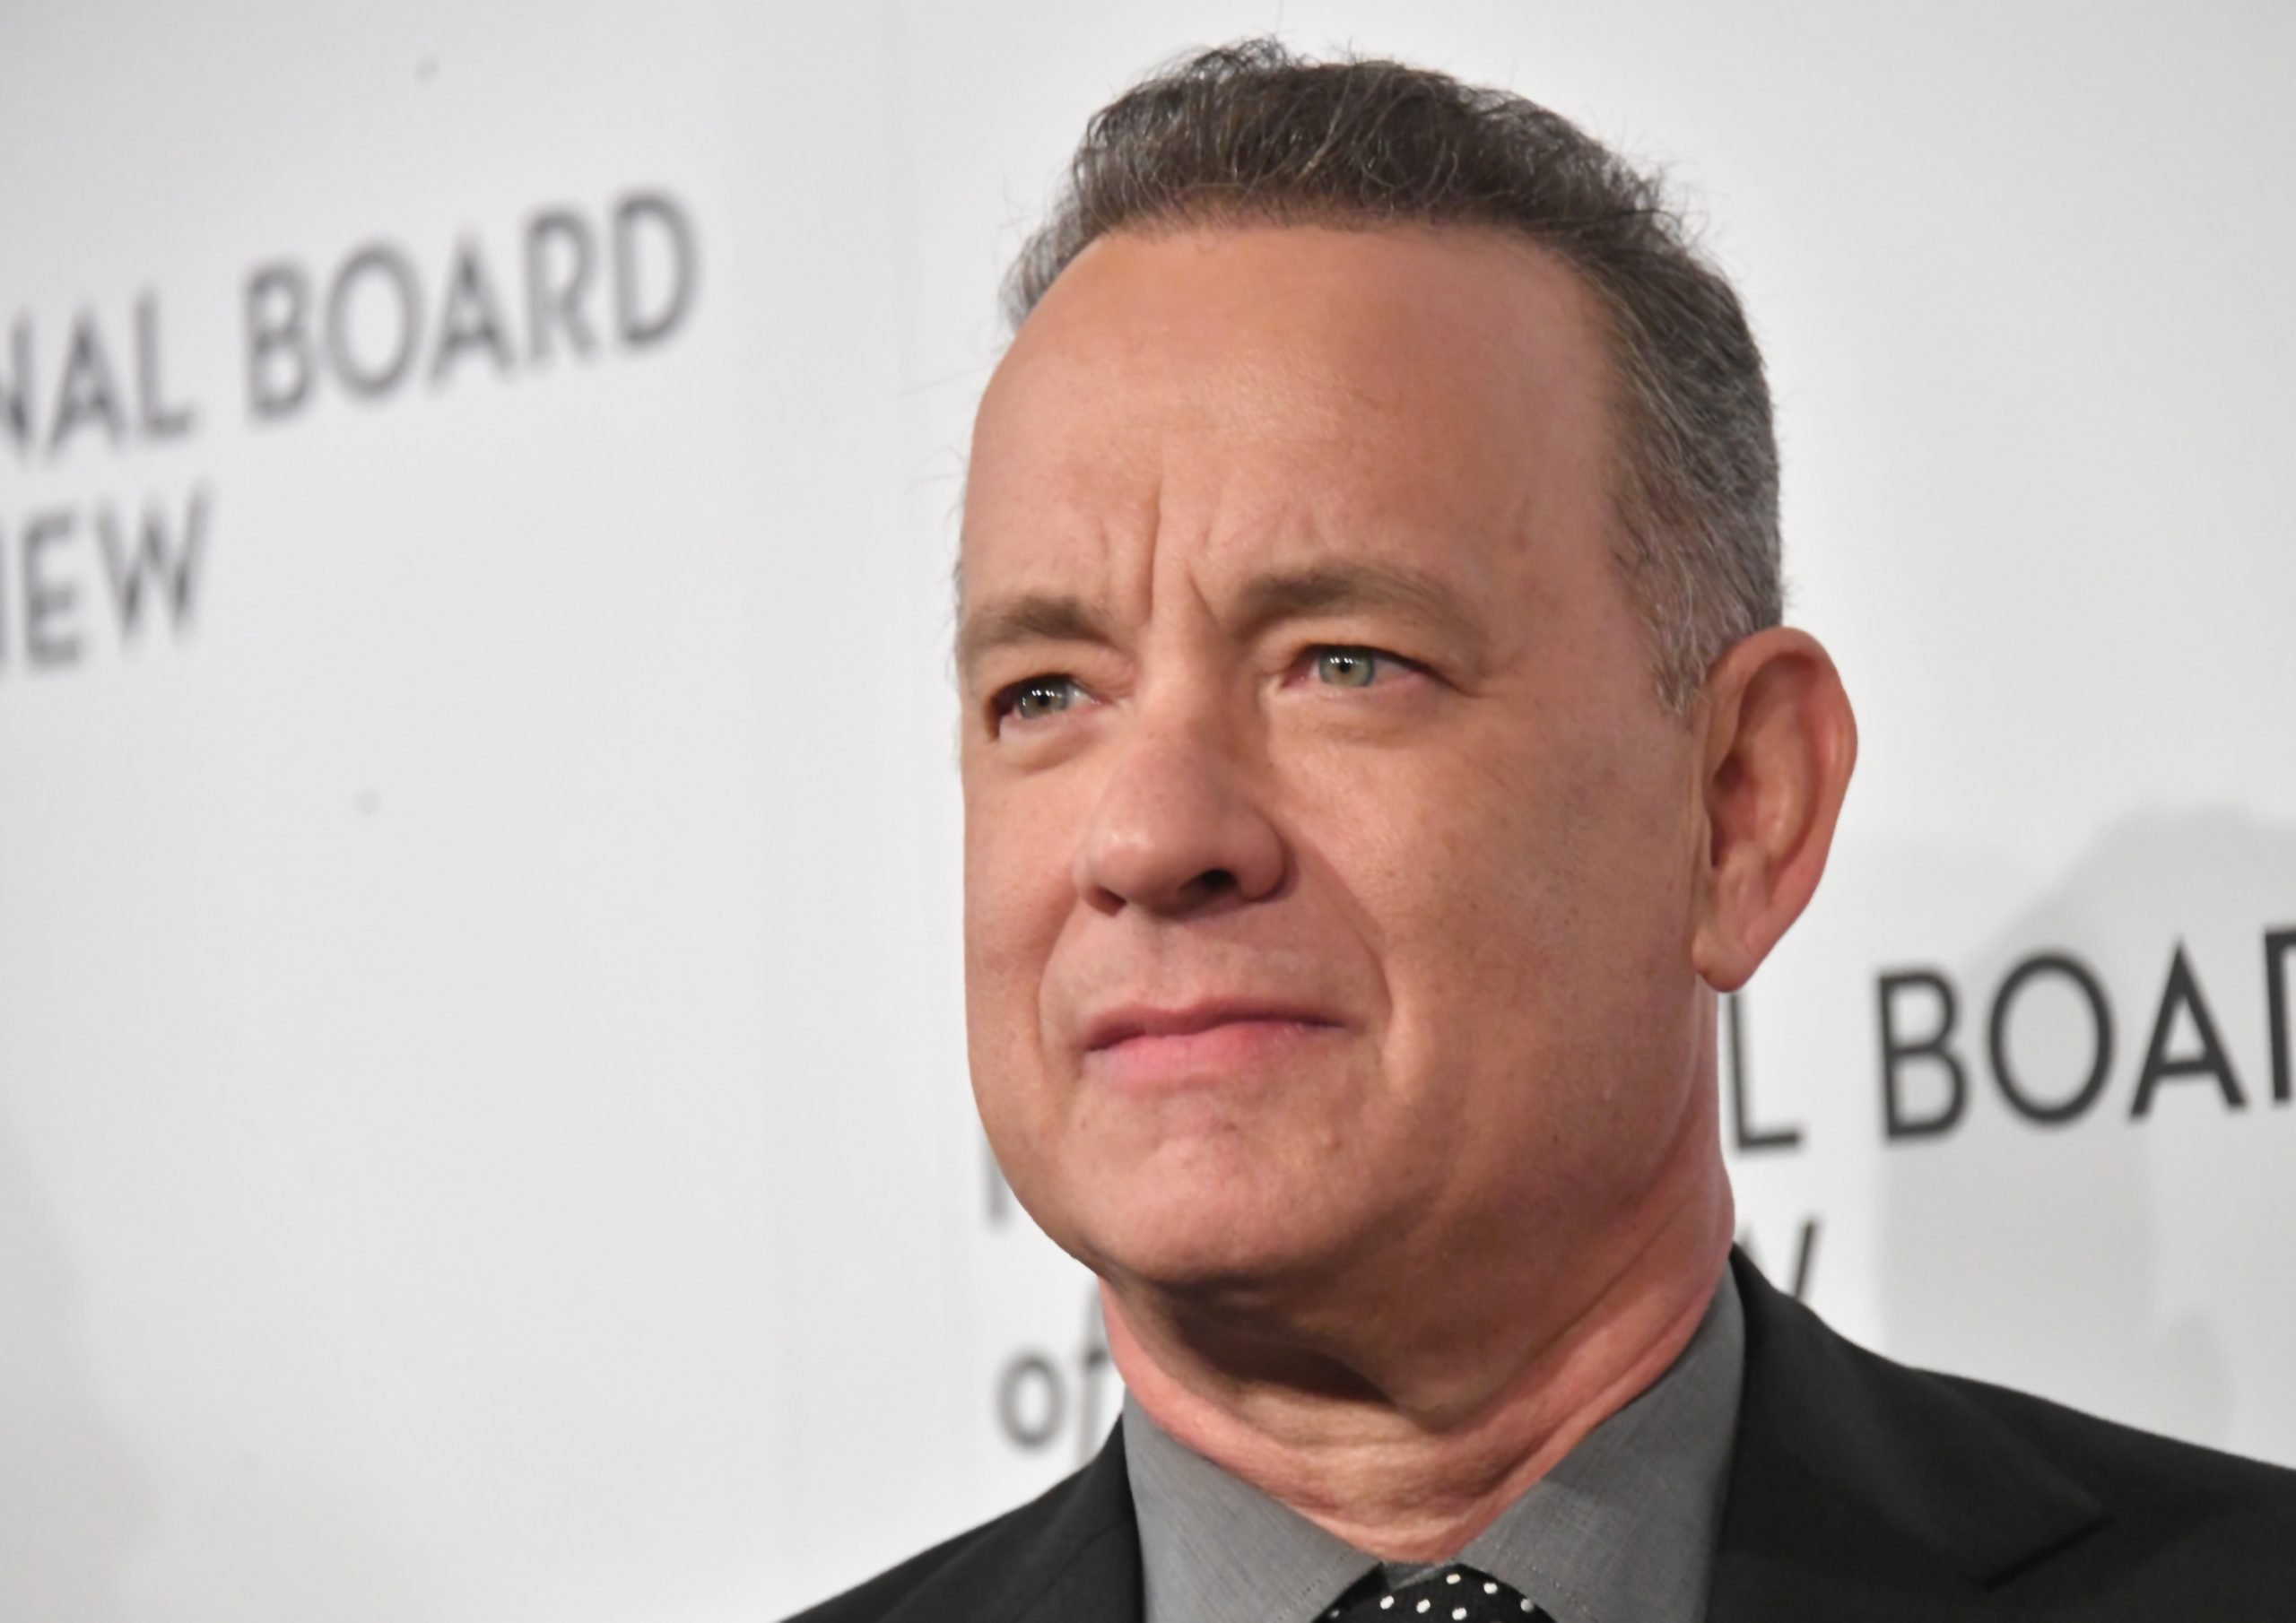 ‘Finch’: Where to Watch the New Tom Hanks Film